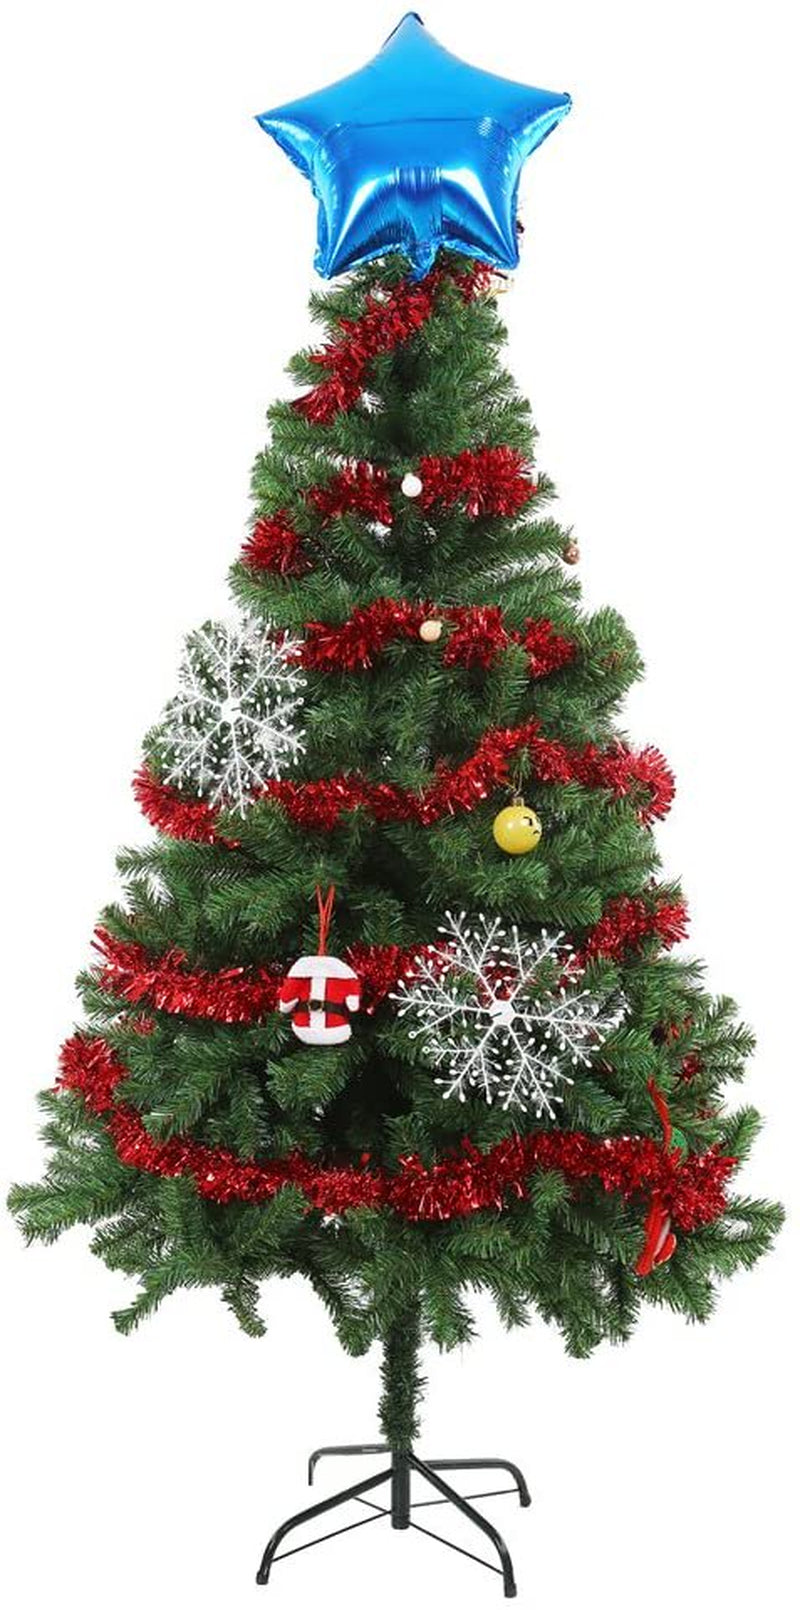 Red Tinsel Garland Christmas Tree Decorations Wedding Birthday Party Supplies for 16.5 FEET Long Home Home & Garden > Decor > Seasonal & Holiday Decorations& Garden > Decor > Seasonal & Holiday Decorations Alvage   